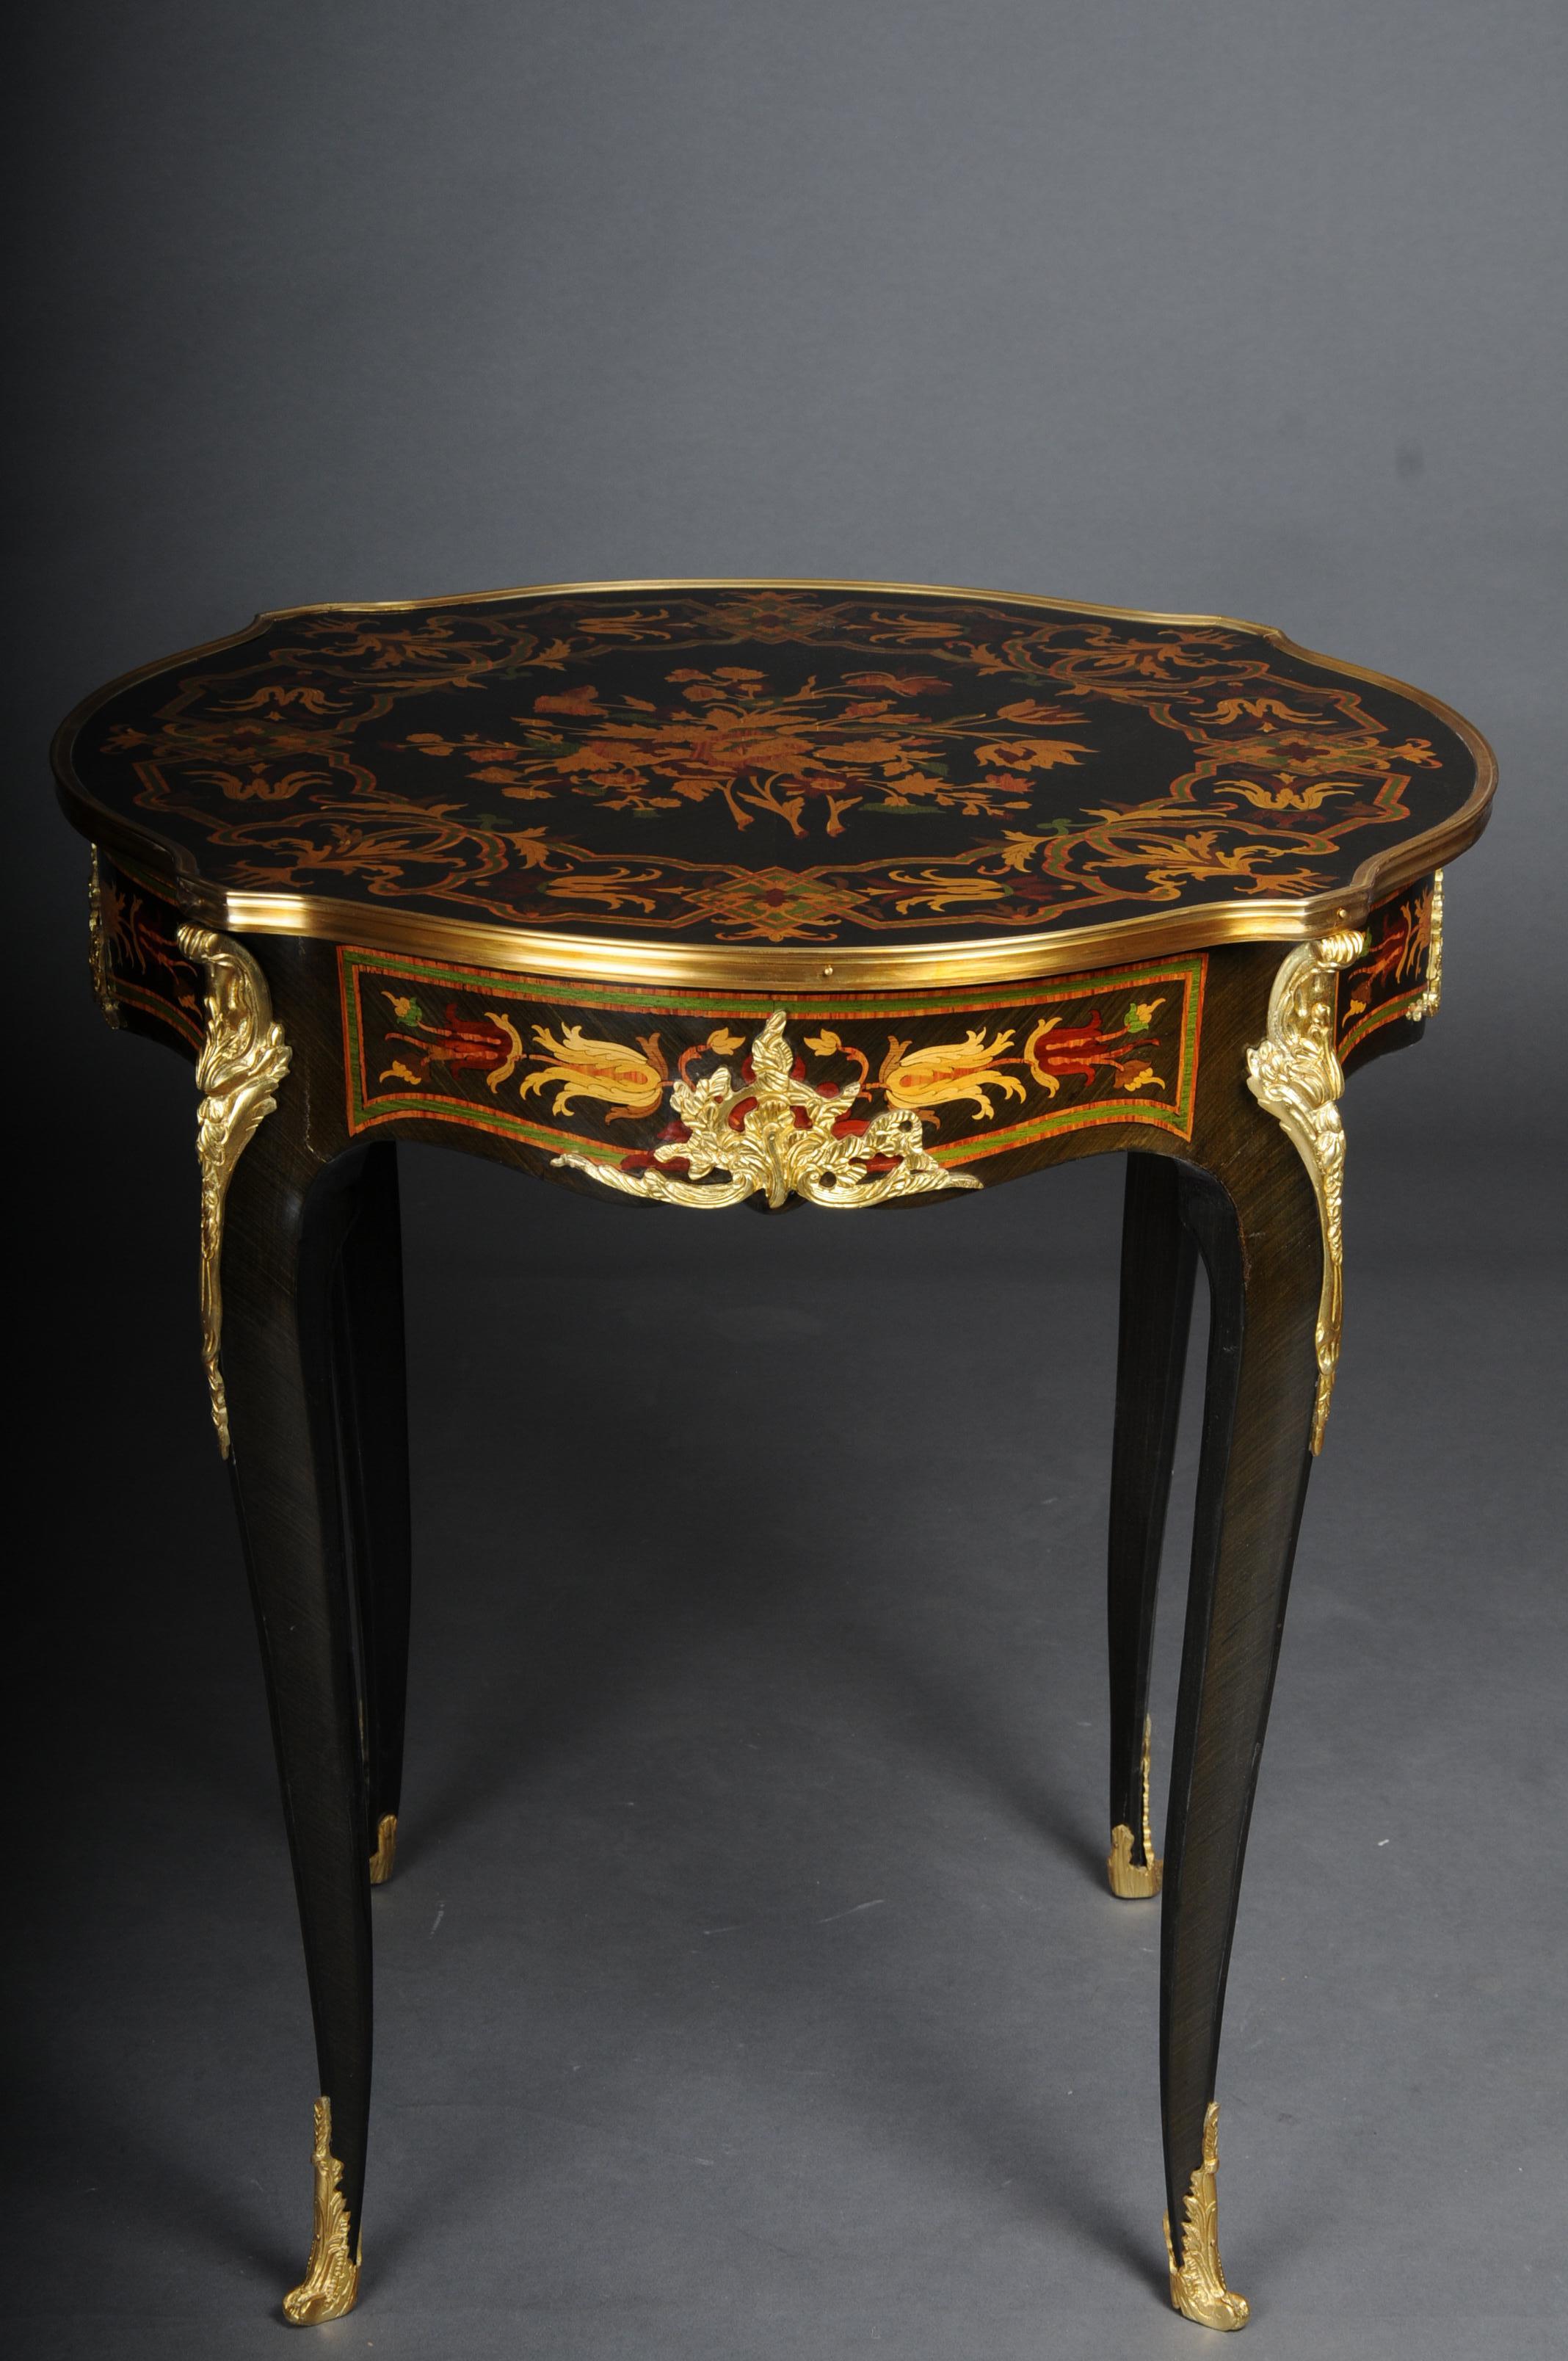 20th Century French side table / salon table, Louis XV, Marquetry

Bois-Satiné veneer, all-round mirror veneer and marquetry on beechwood. Set with finely chased, very decorative, pierced bronze fittings edged. Carcase box on sloping, curly legs